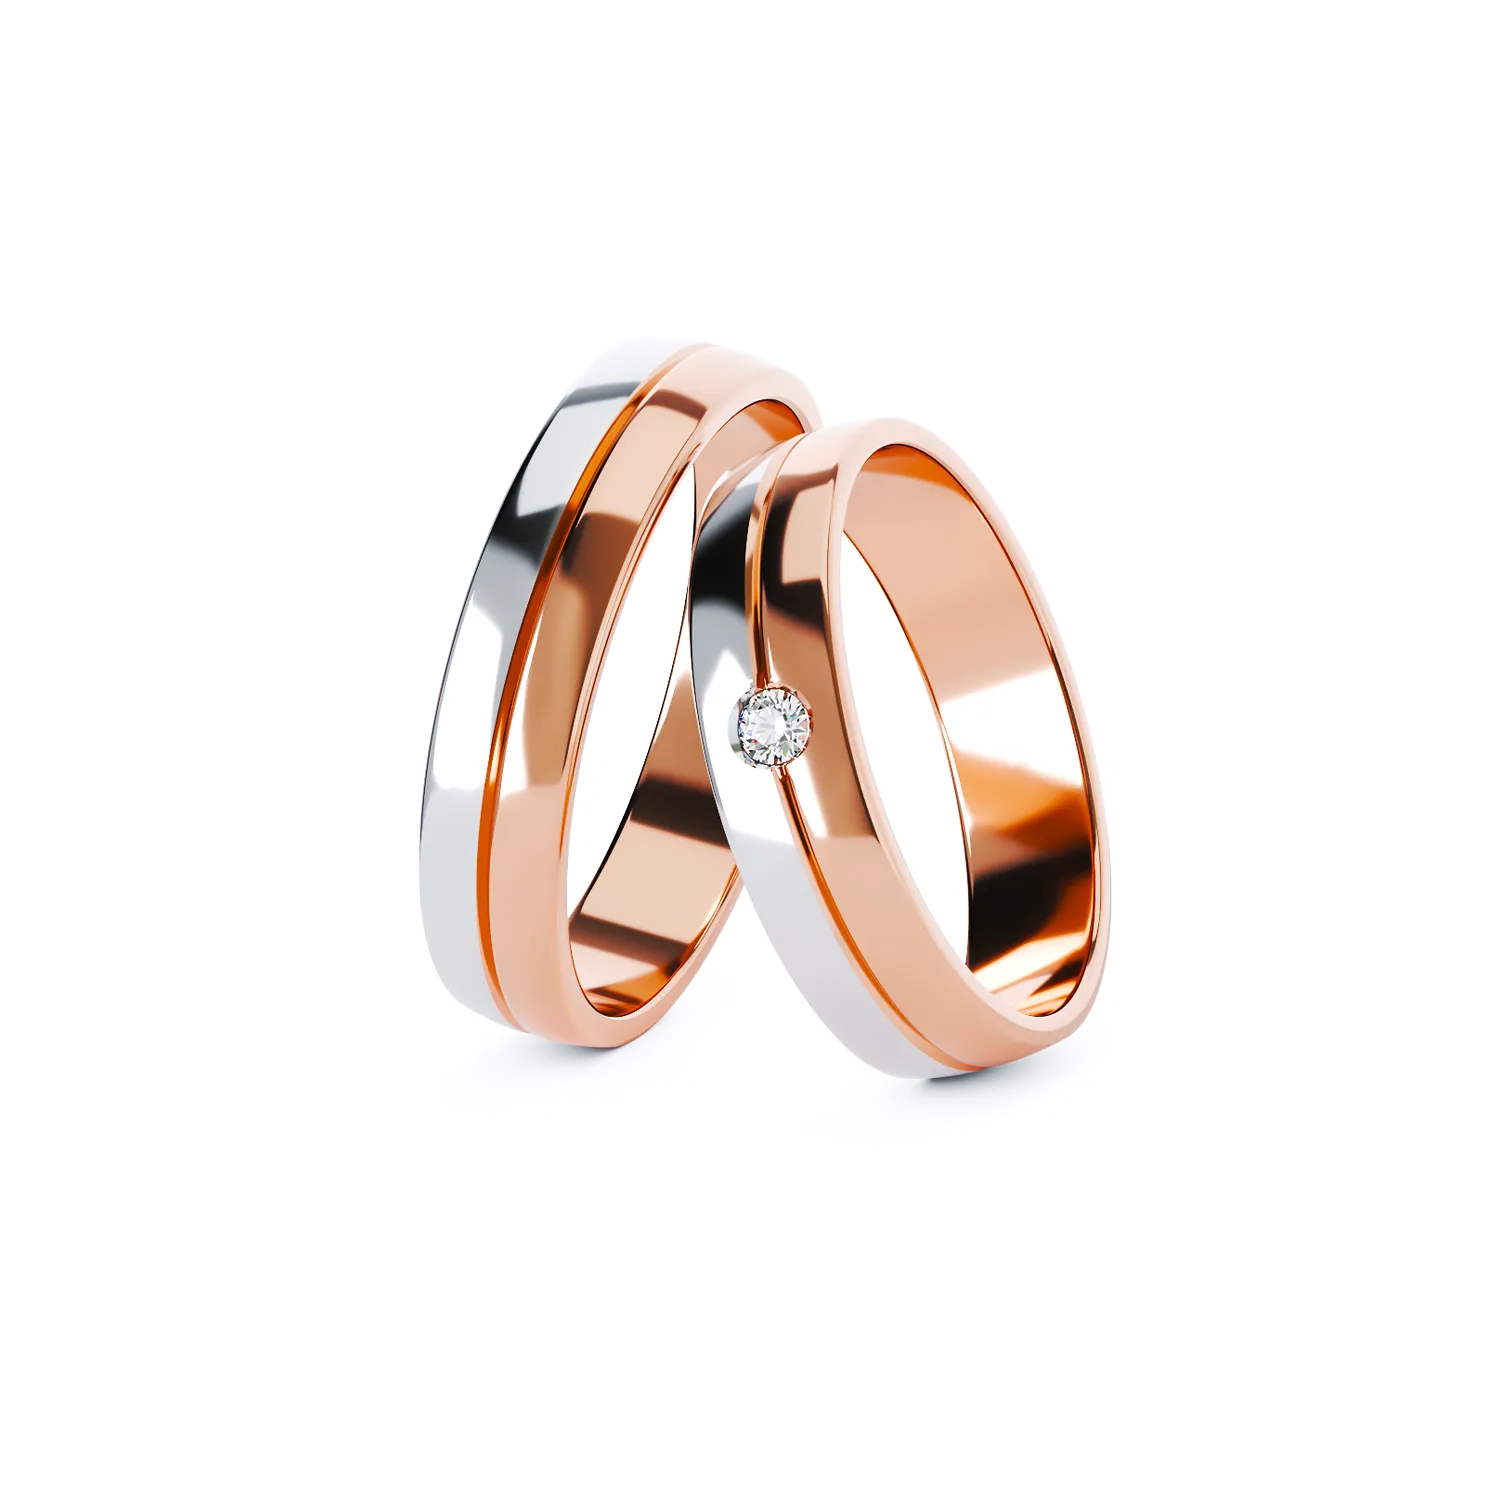 CATE gold wedding rings